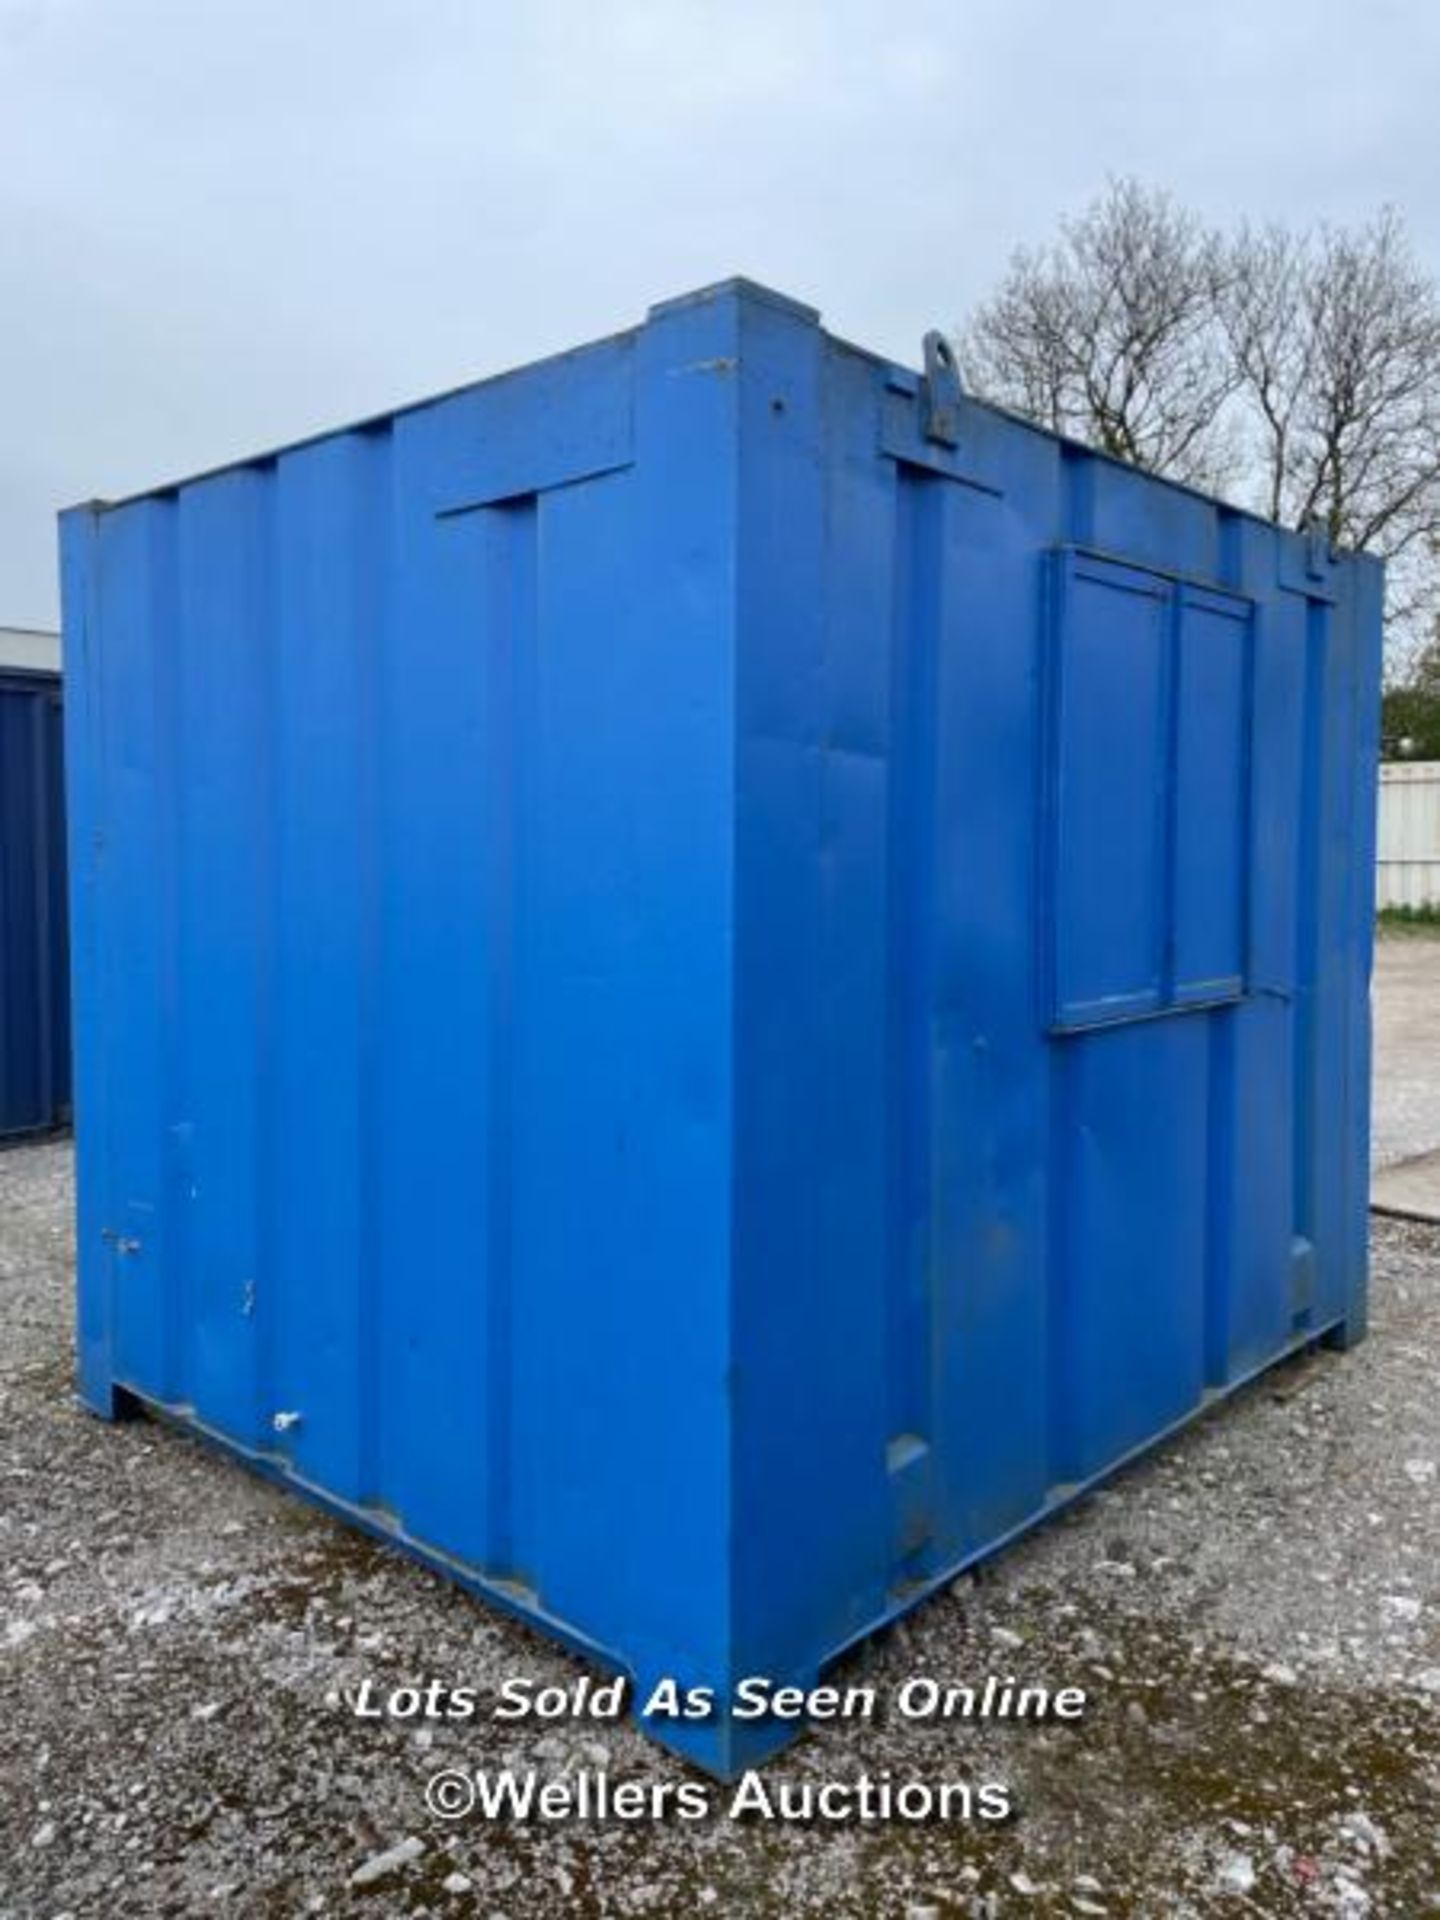 10' X 8' PORTABLE STEEL SHOWER BLOCK, UNIT INCLUDES HYCO EXTRACTION FAN, ELECTRICAL SWITCHBOARD, - Image 7 of 16